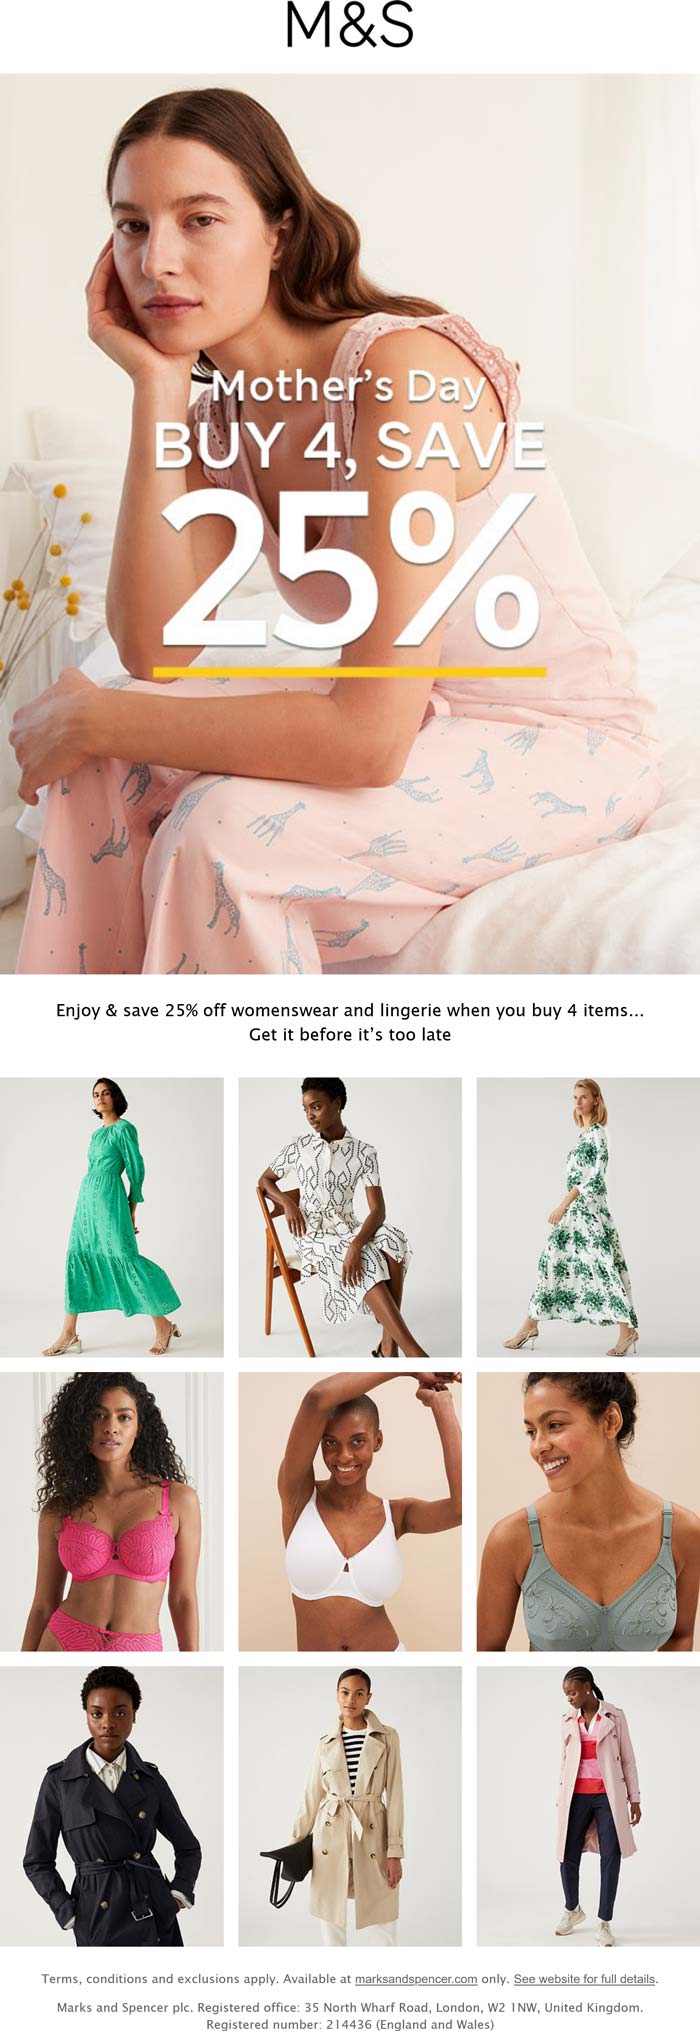 Marks & Spencer stores Coupon  25% off 4+ womenswear & lingerie at Marks & Spencer #marksspencer 